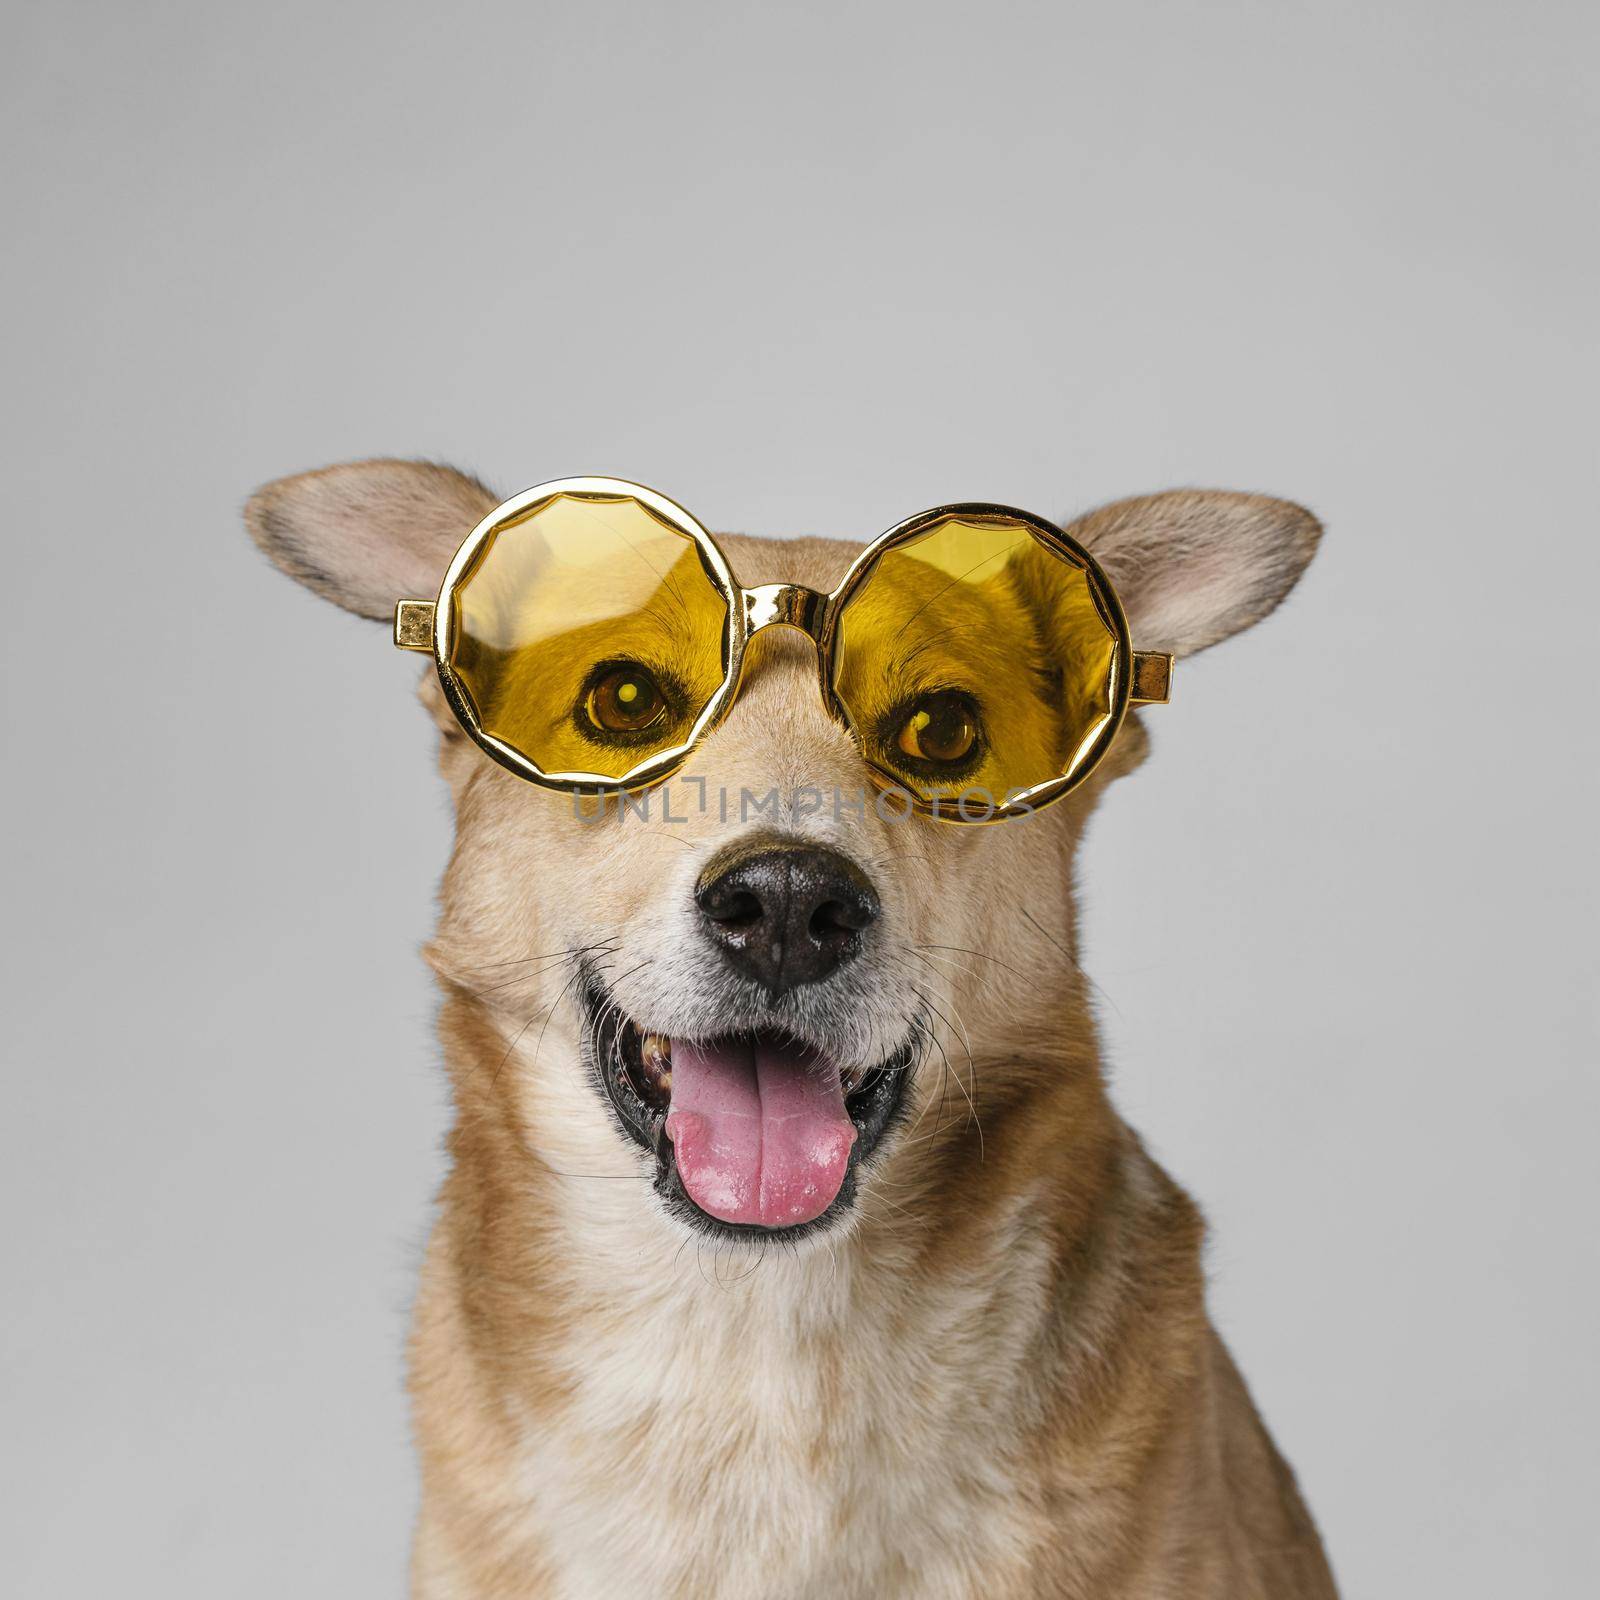 cute smiley dog wearing sunglasses. High quality beautiful photo concept by Zahard